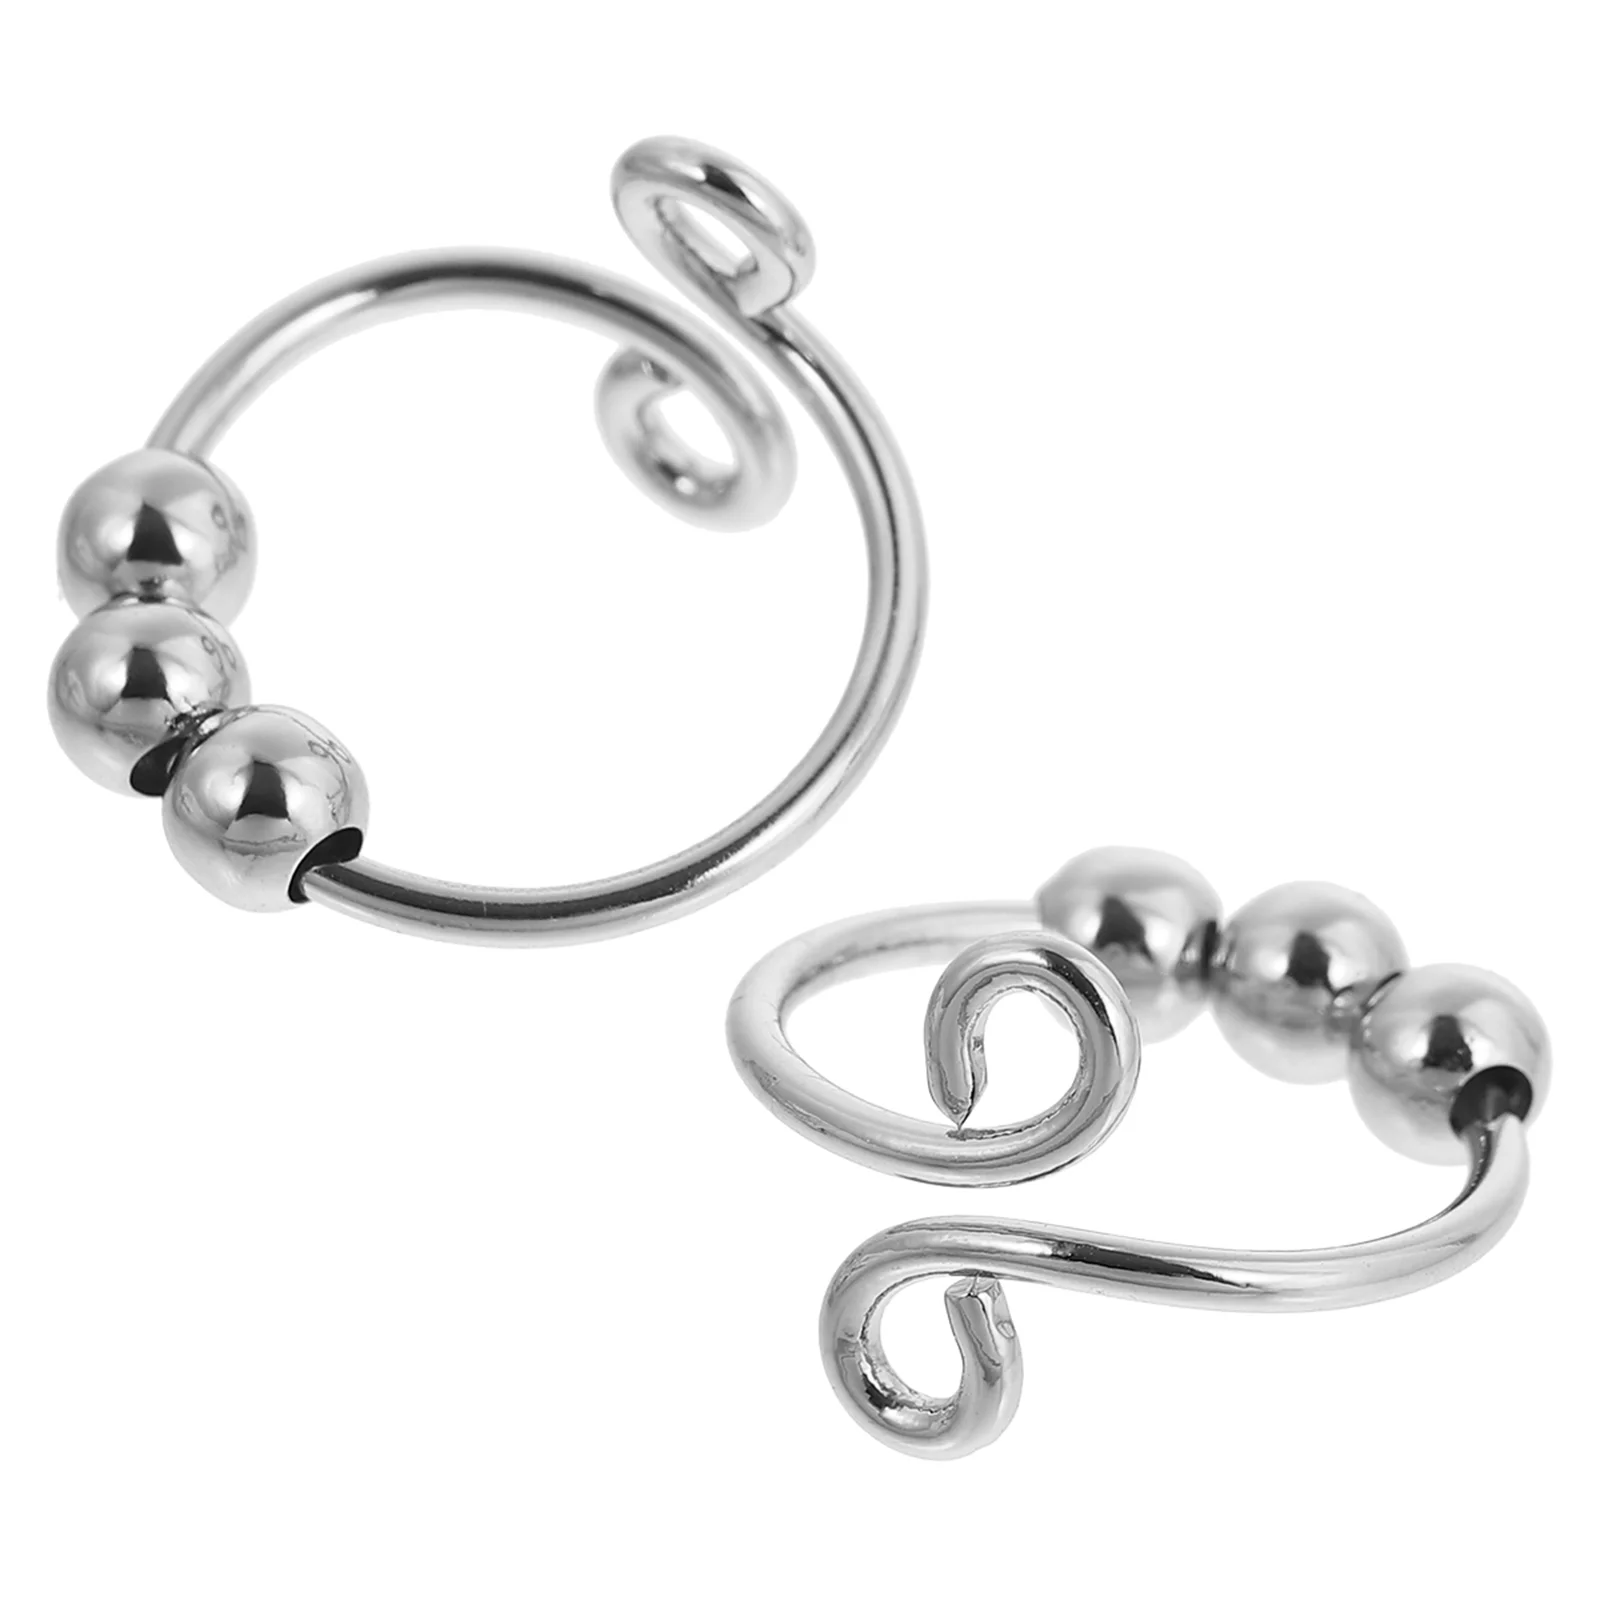 

2 Pcs Bead Split Ring Couple Rings Beads Women Fidget Anxiety Wave Gift Alloy Man Rotatable Jewelry